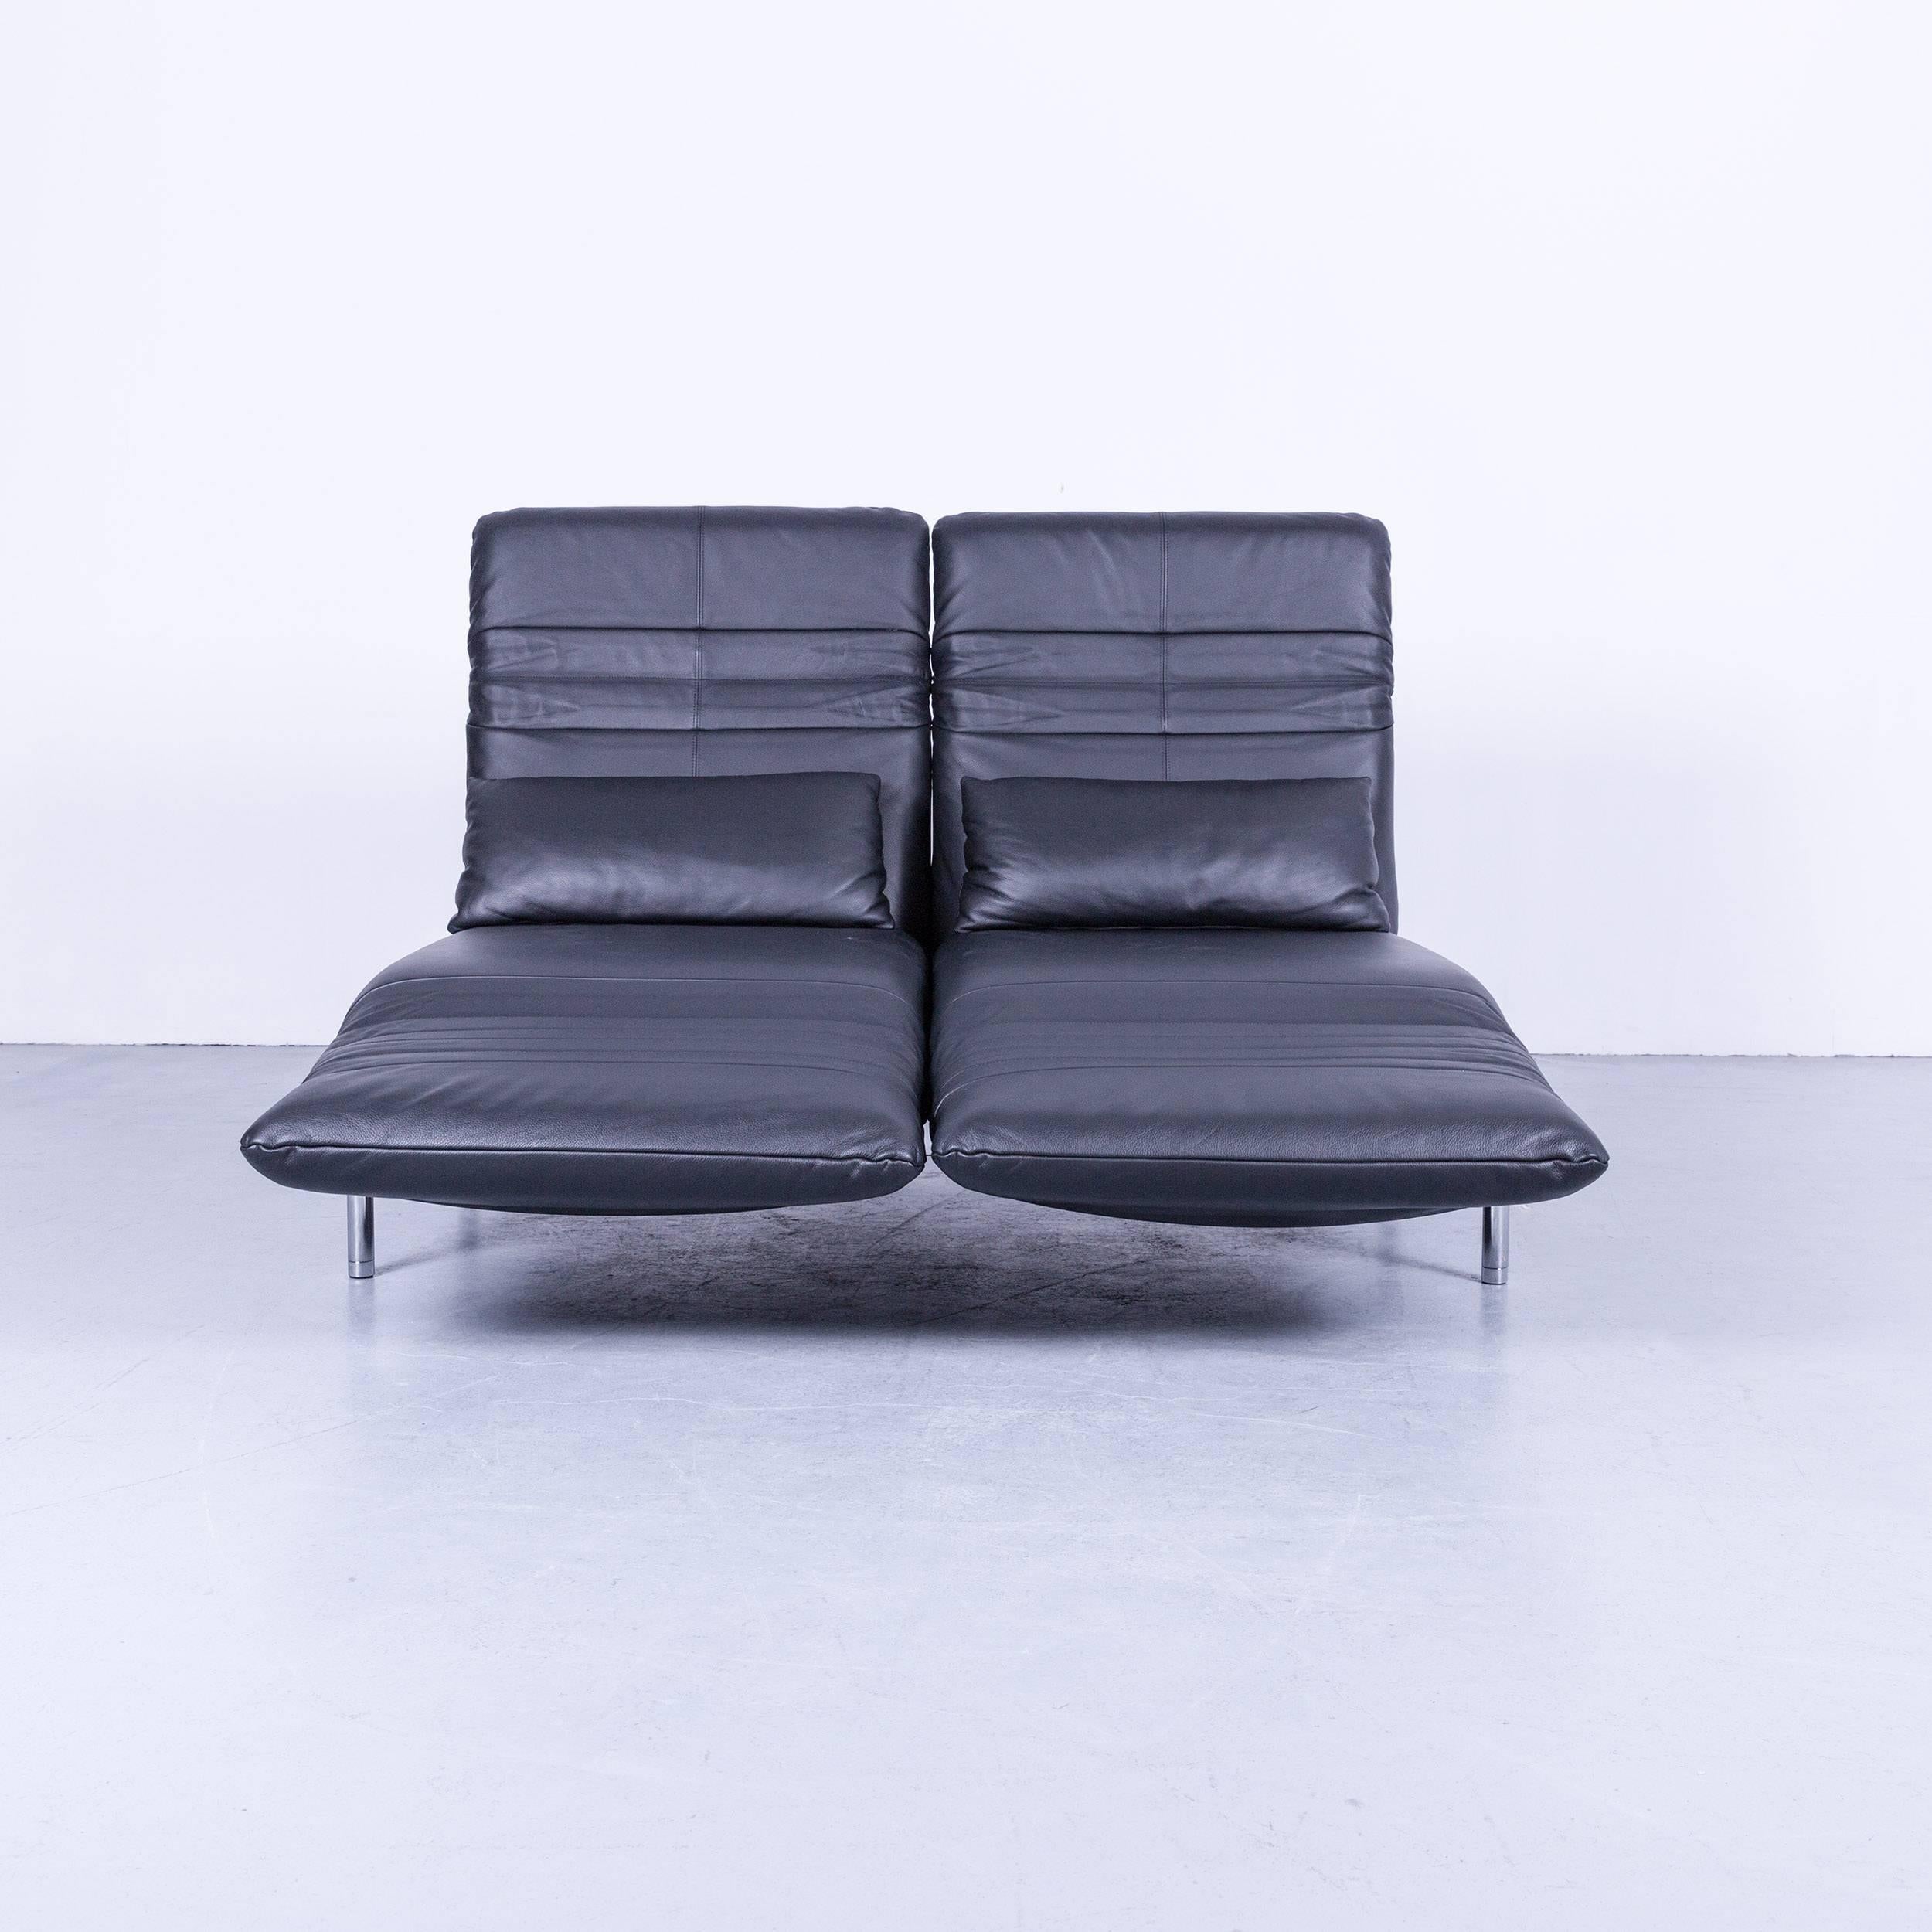 Rolf Benz Plura designer sofa with black leather relax function couch modern, in a minimalistic and modern design, with convenient functions, made for pure comfort.